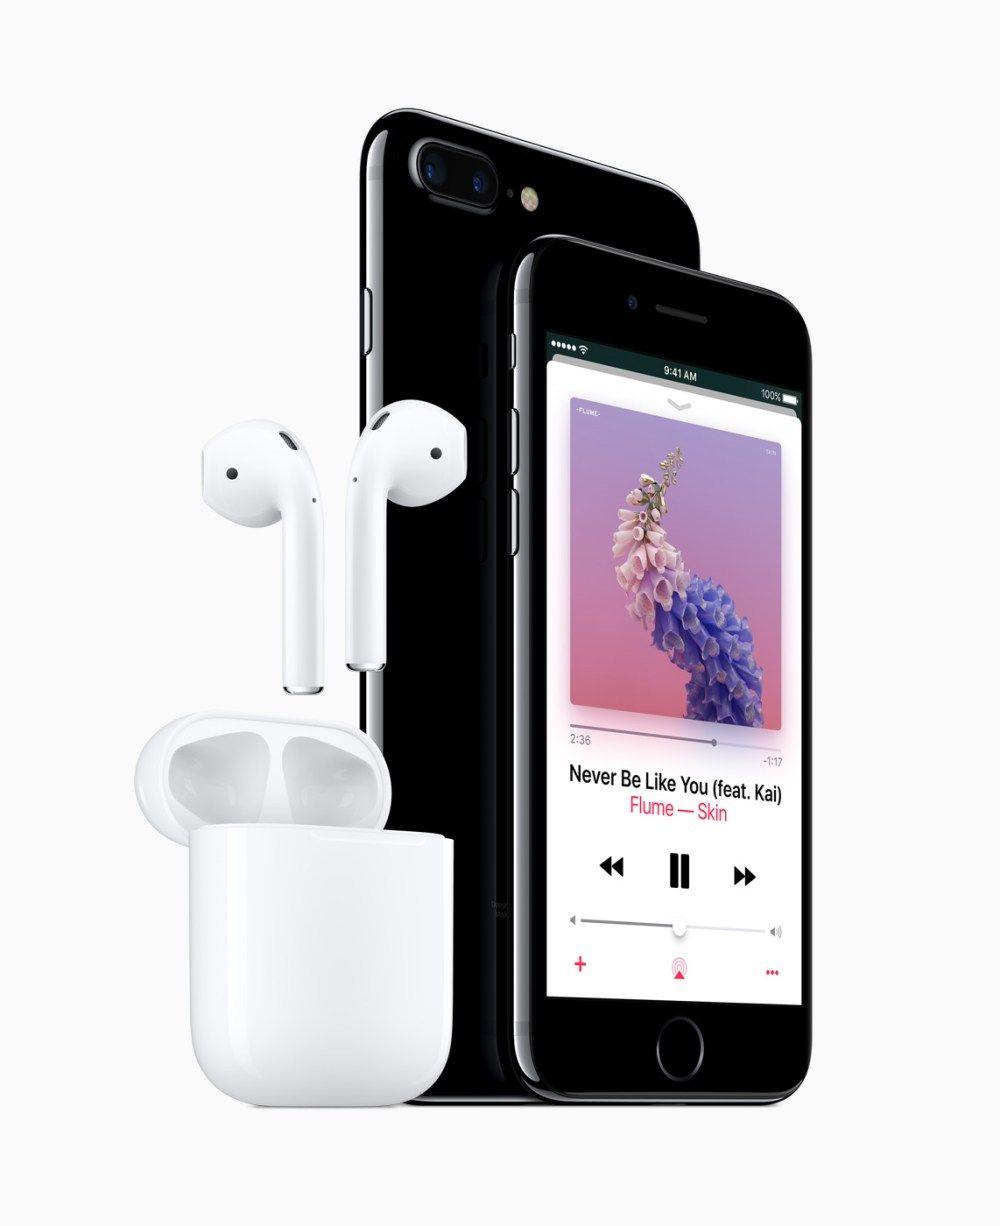 AirPods 2 With Hey Siri, W2 Chip And Water Resistance Coming In 2018